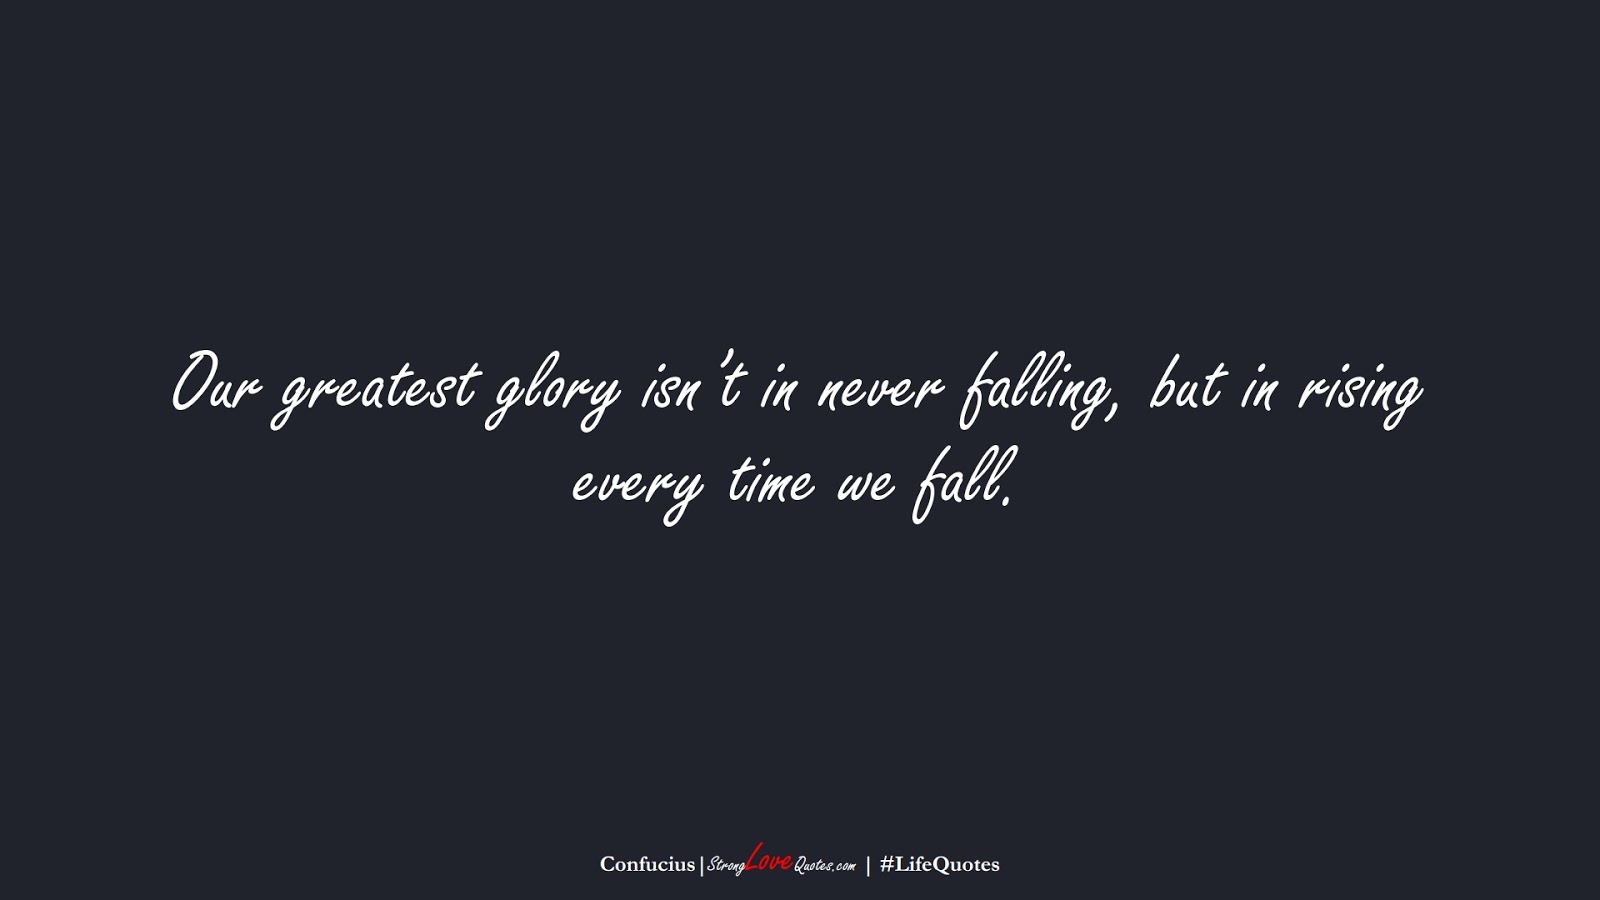 Our greatest glory isn’t in never falling, but in rising every time we fall. (Confucius);  #LifeQuotes